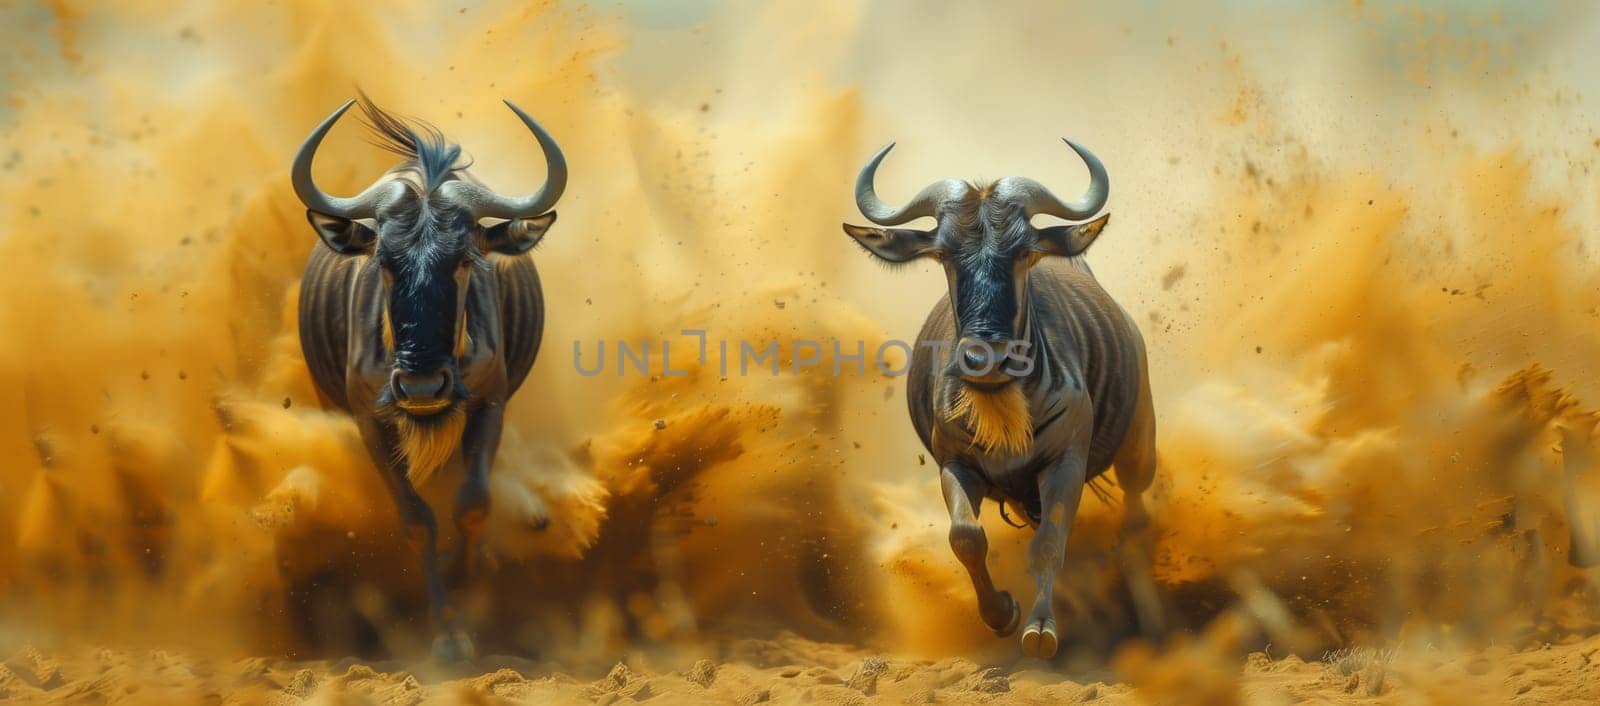 Two wildebeest, working animals with horns, are galloping across a dusty field. These terrestrial bovines are agile and powerful as they navigate their surroundings with grace